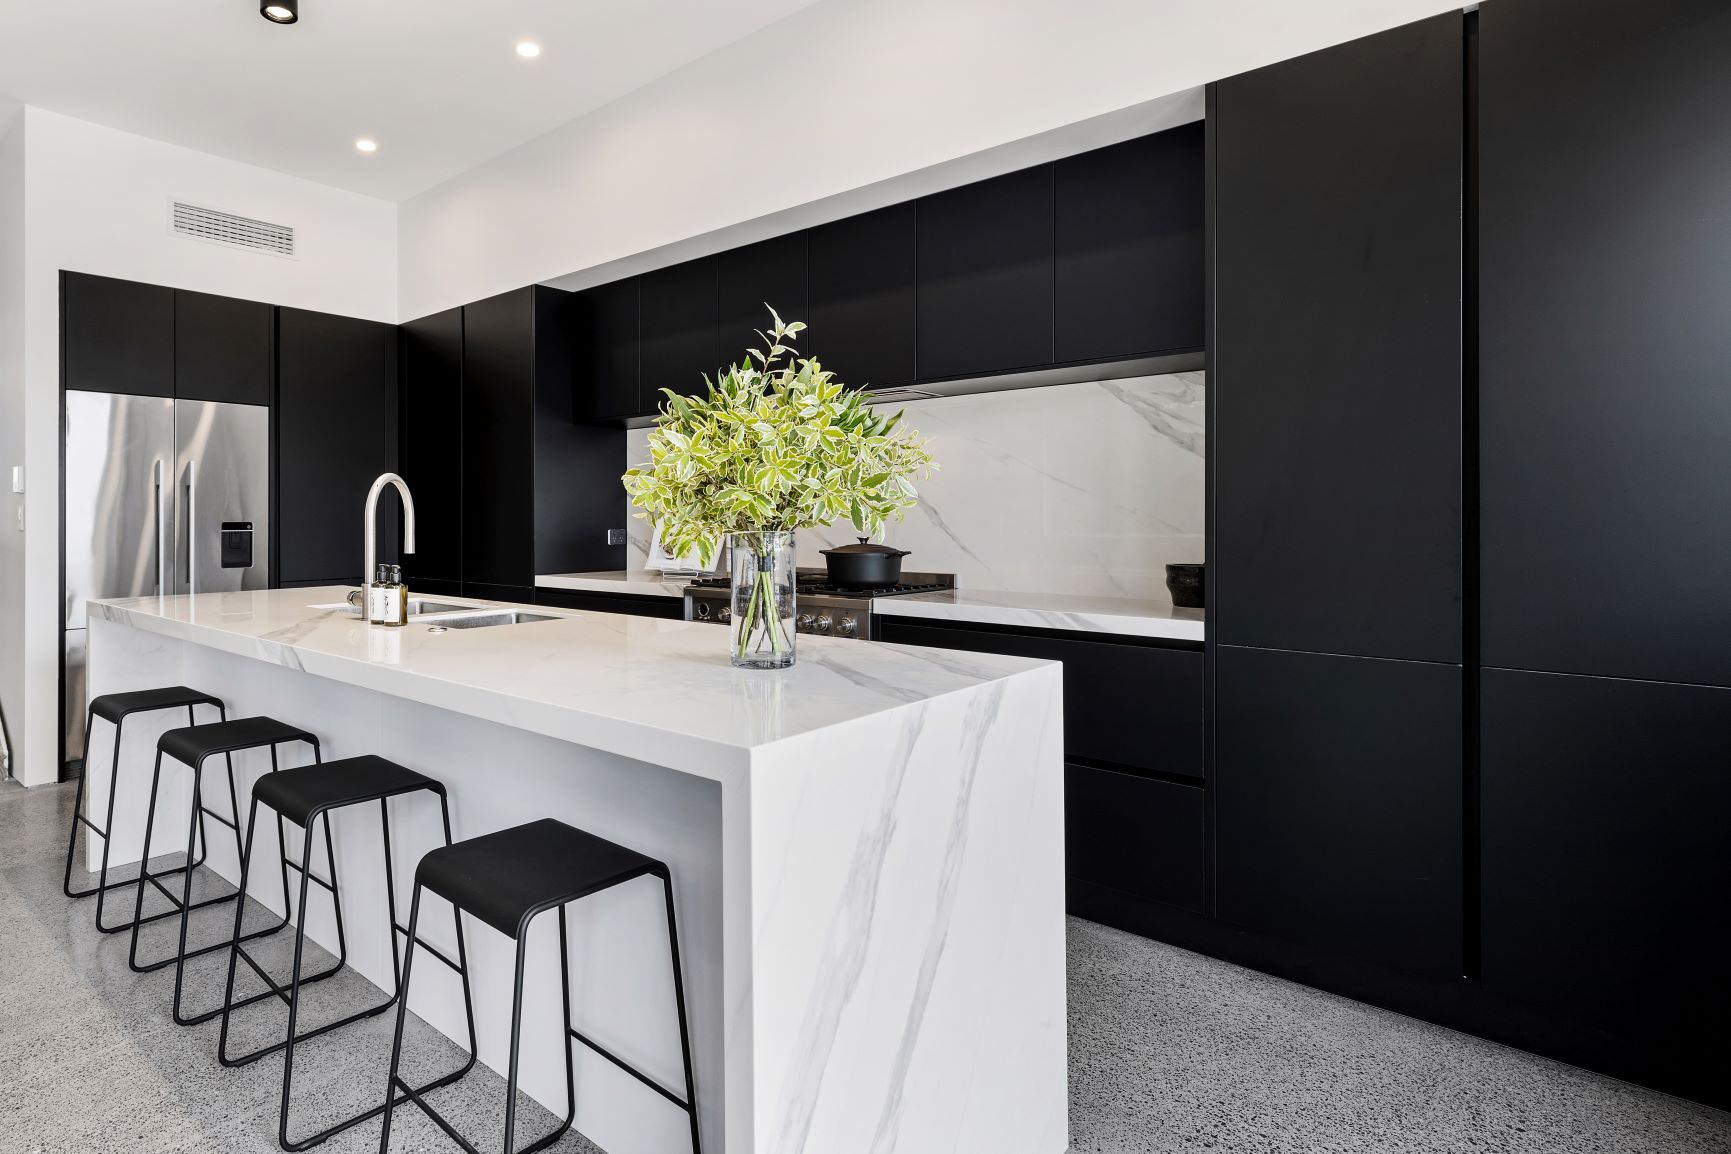 5 Reasons Why German Kitchens Are So Popular In New Zealand